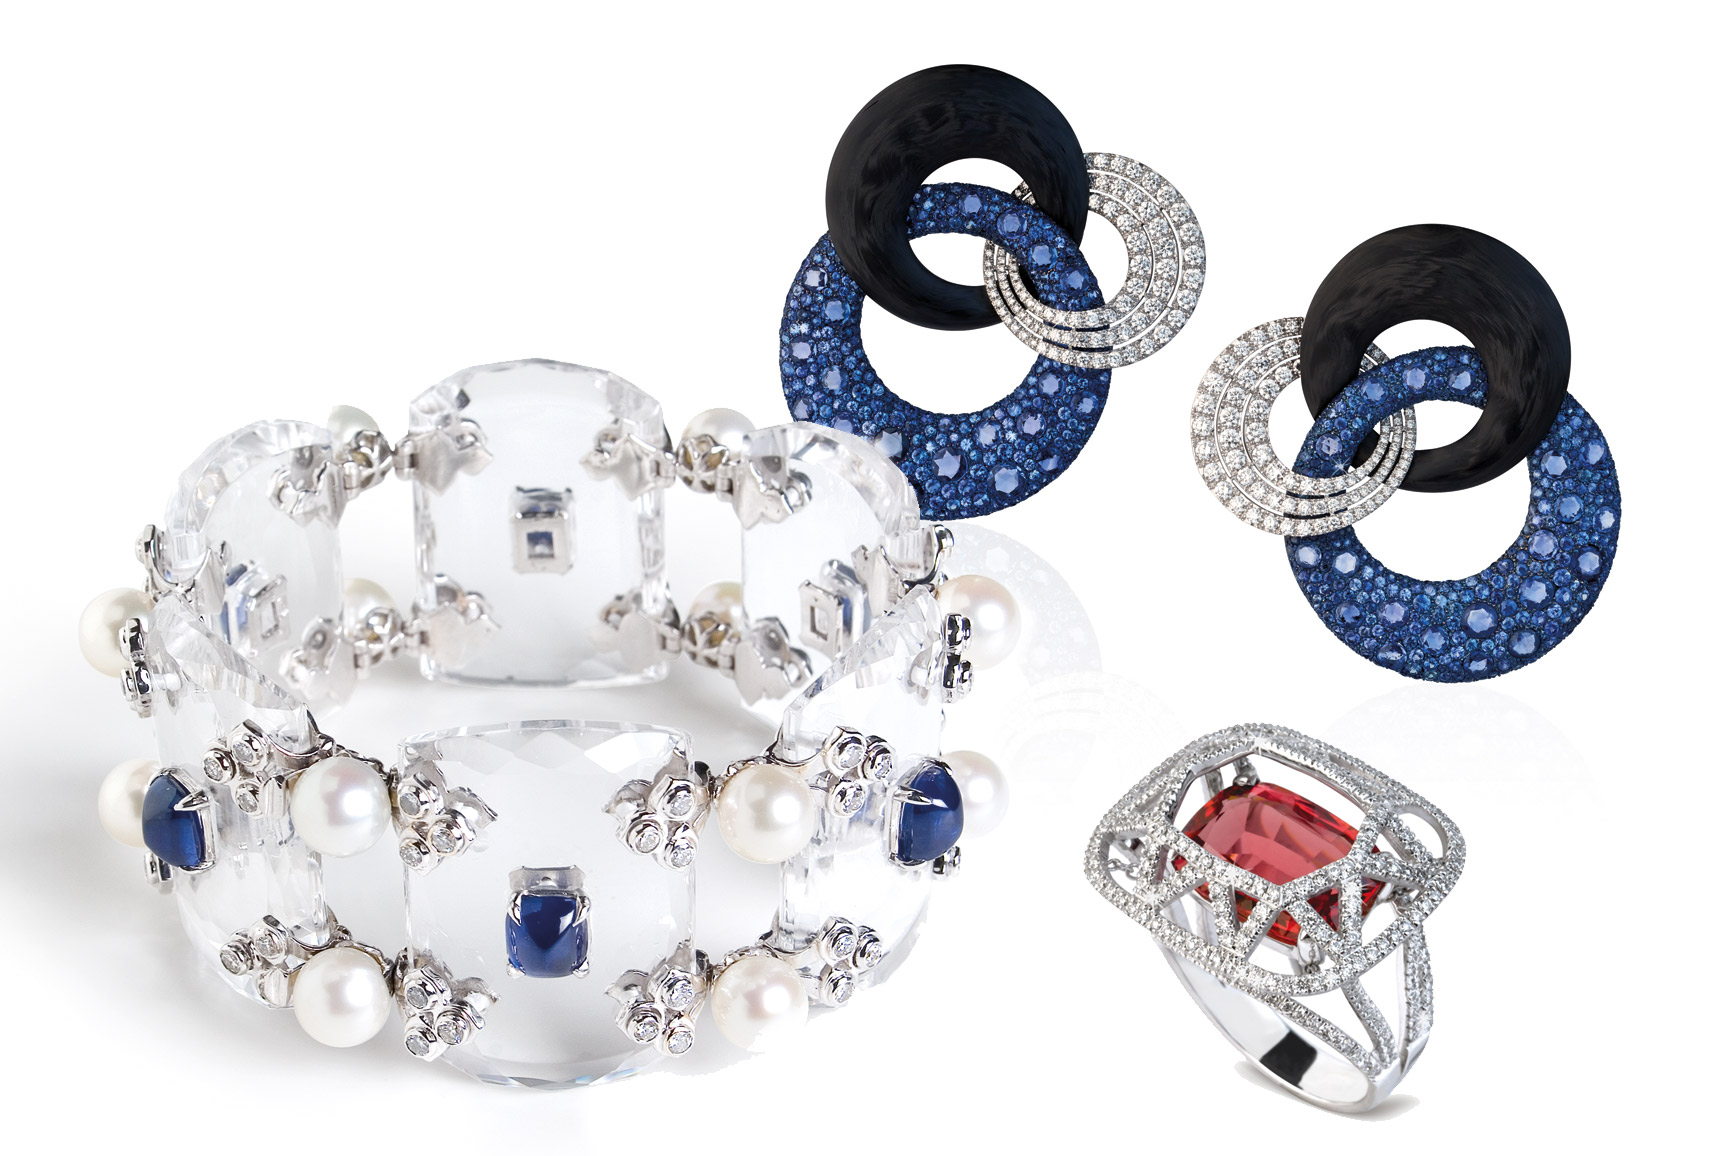 Fabio Salini 'Crystal' bracelet in rock crystal, blue sapphires, pearls and diamonds. Earrings in gold, titanium, carbon fibre, sapphires, and diamonds. 'Cage' ring in peach spinel, diamonds and gold